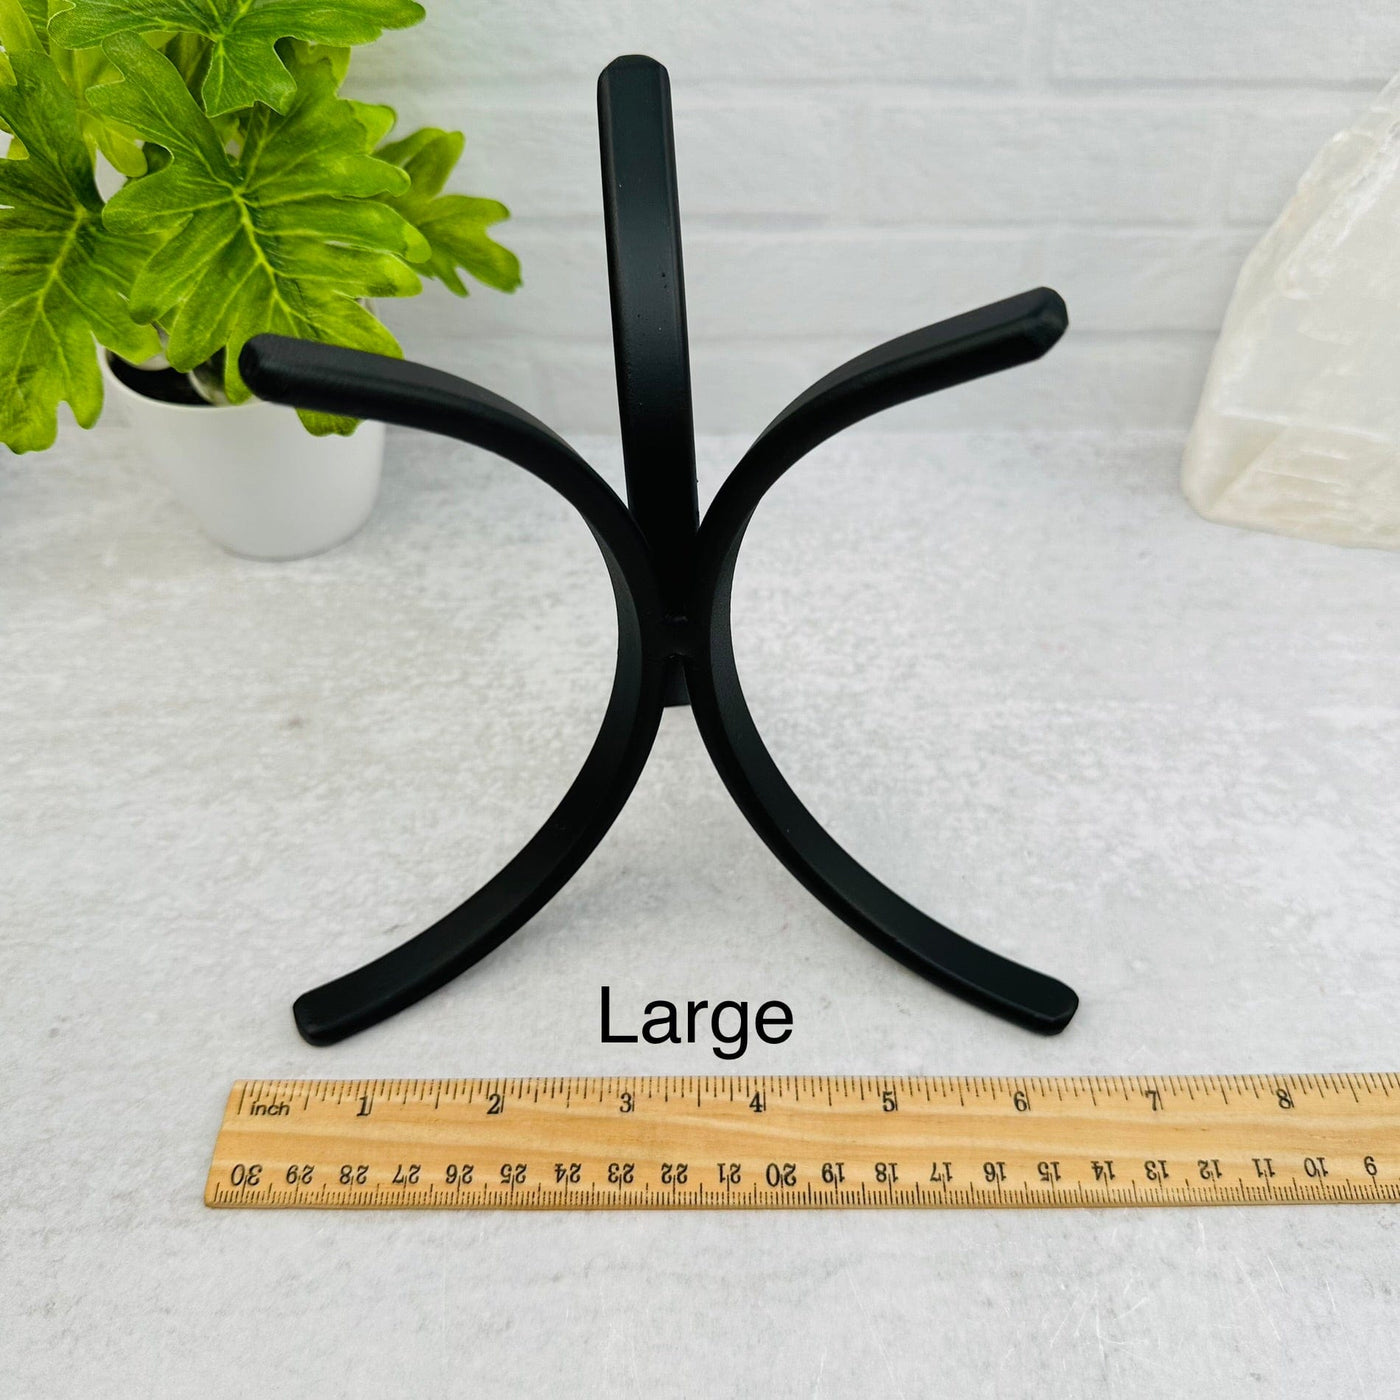 Metal Black Crystal Stand - Two Sizes in One - By Size - next to a ruler for size reference 